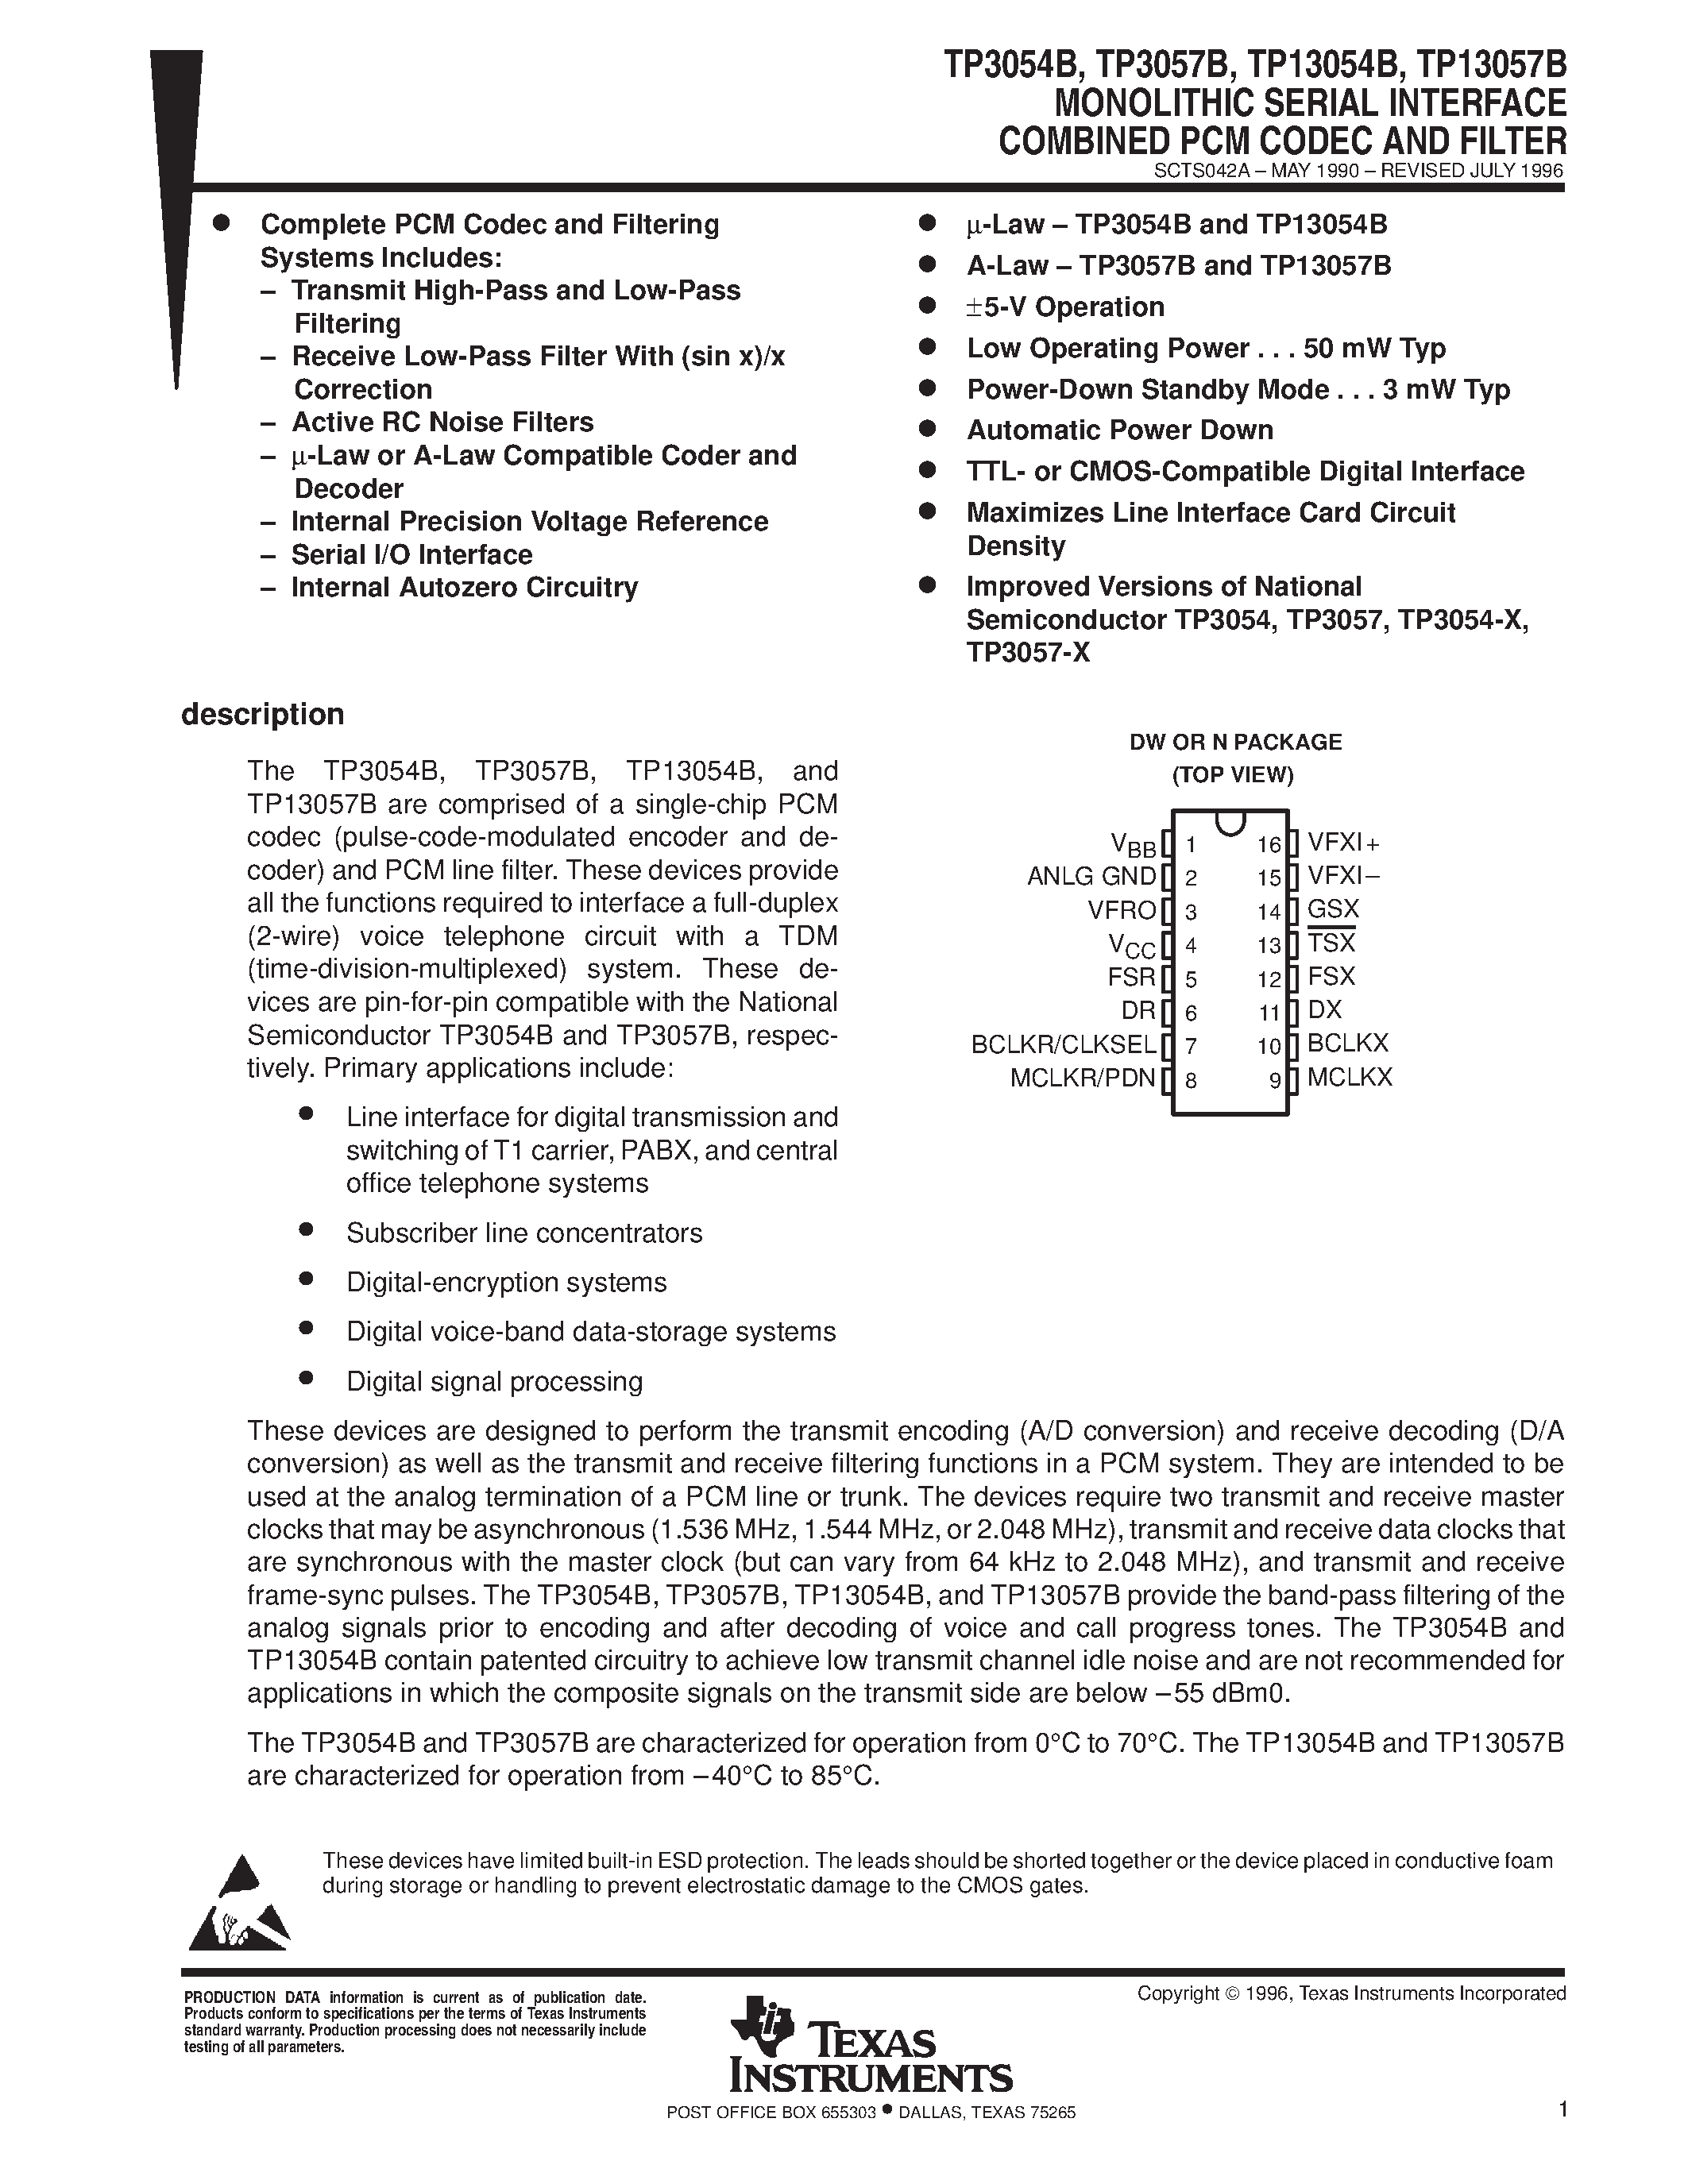 Datasheet TP13054B - MONOLITHIC SERIAL INTERFACE COMBINED PCM CODEC AND FILTER page 1